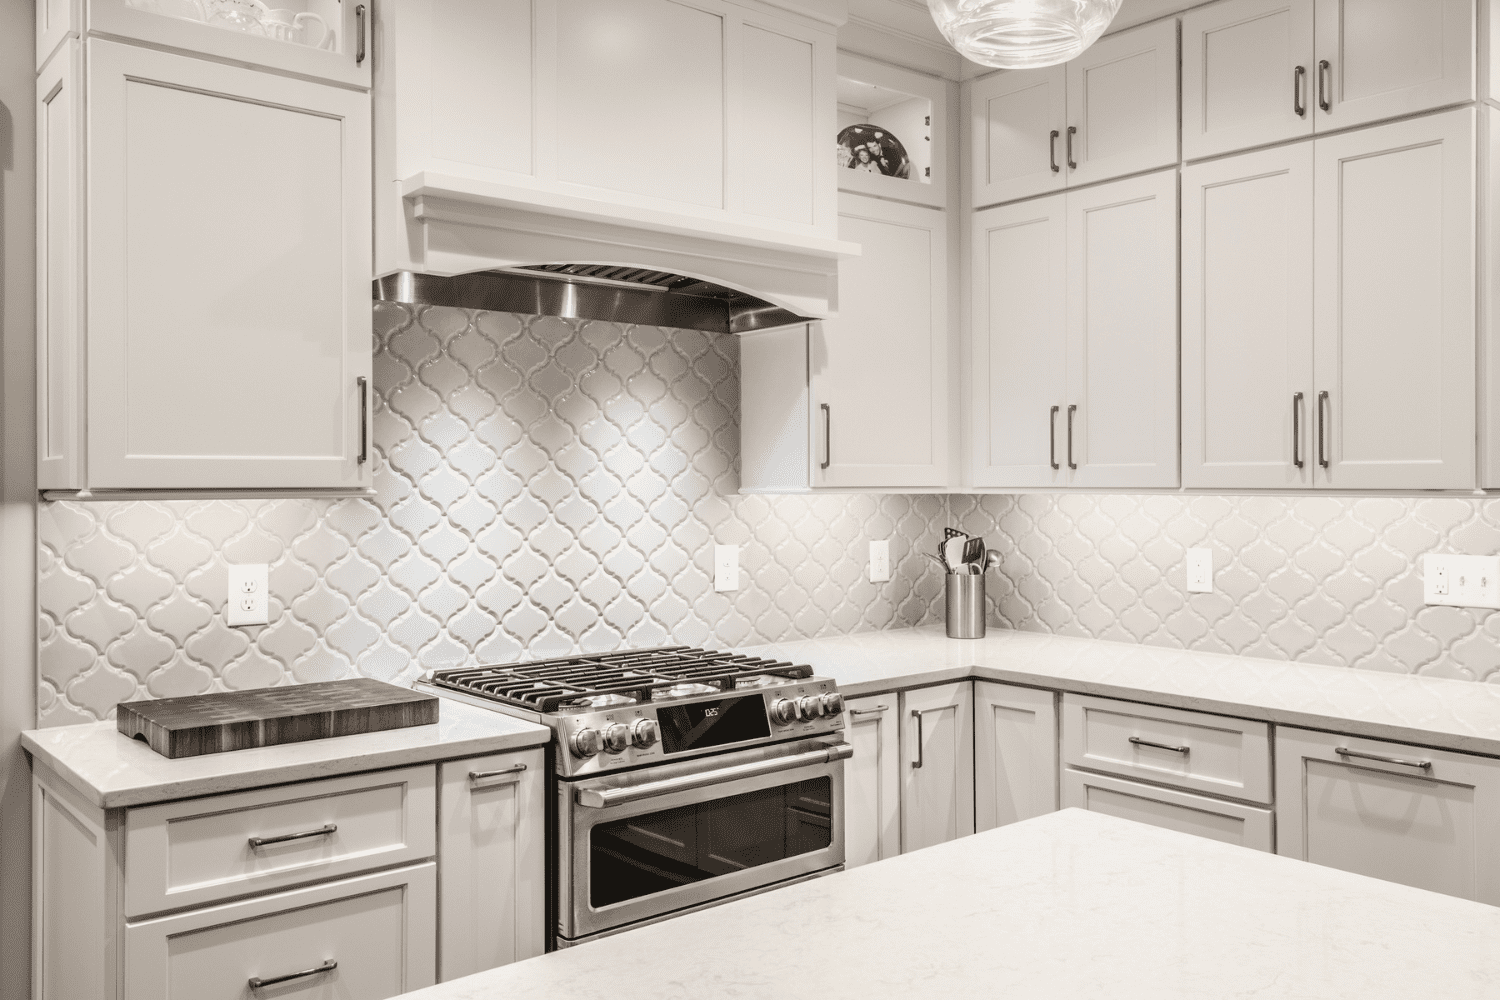 Nicholas Design Build | A kitchen with white cabinets and stainless steel appliances.